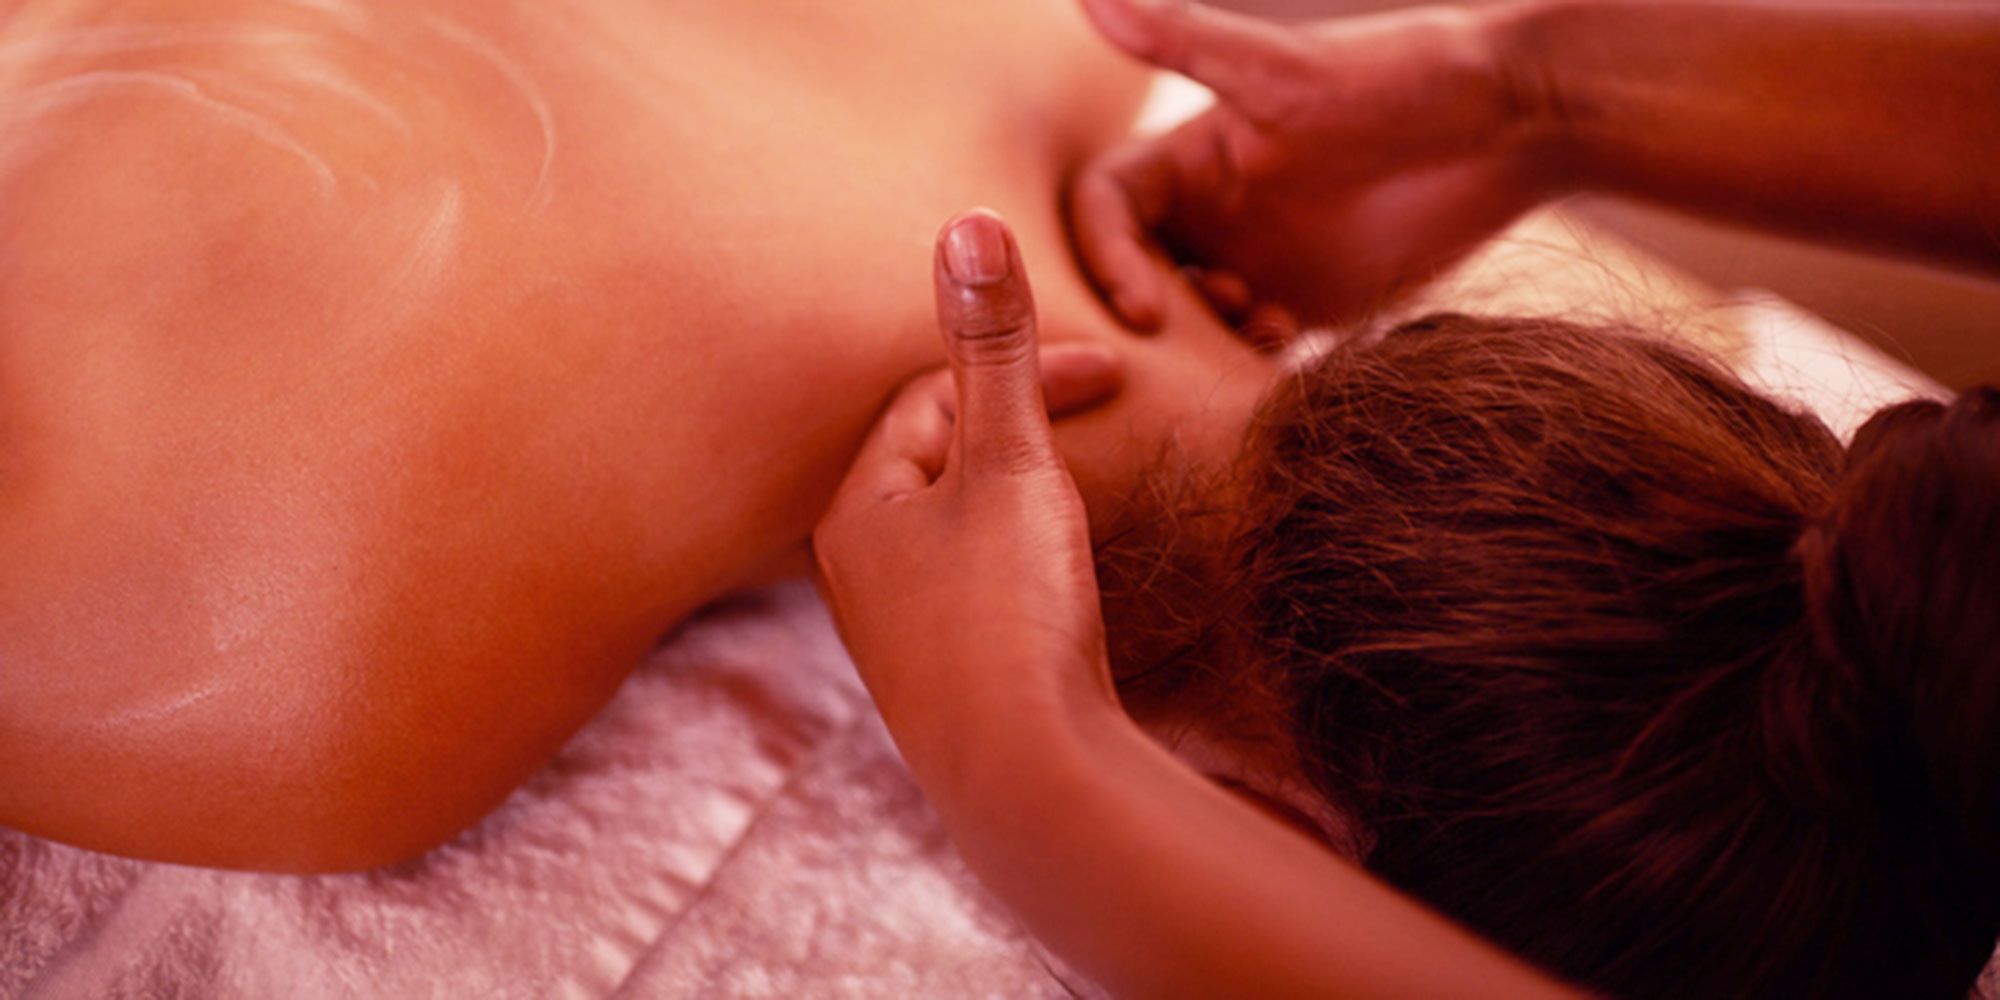 Orgasmic massage stories from women who pay a stranger image pic